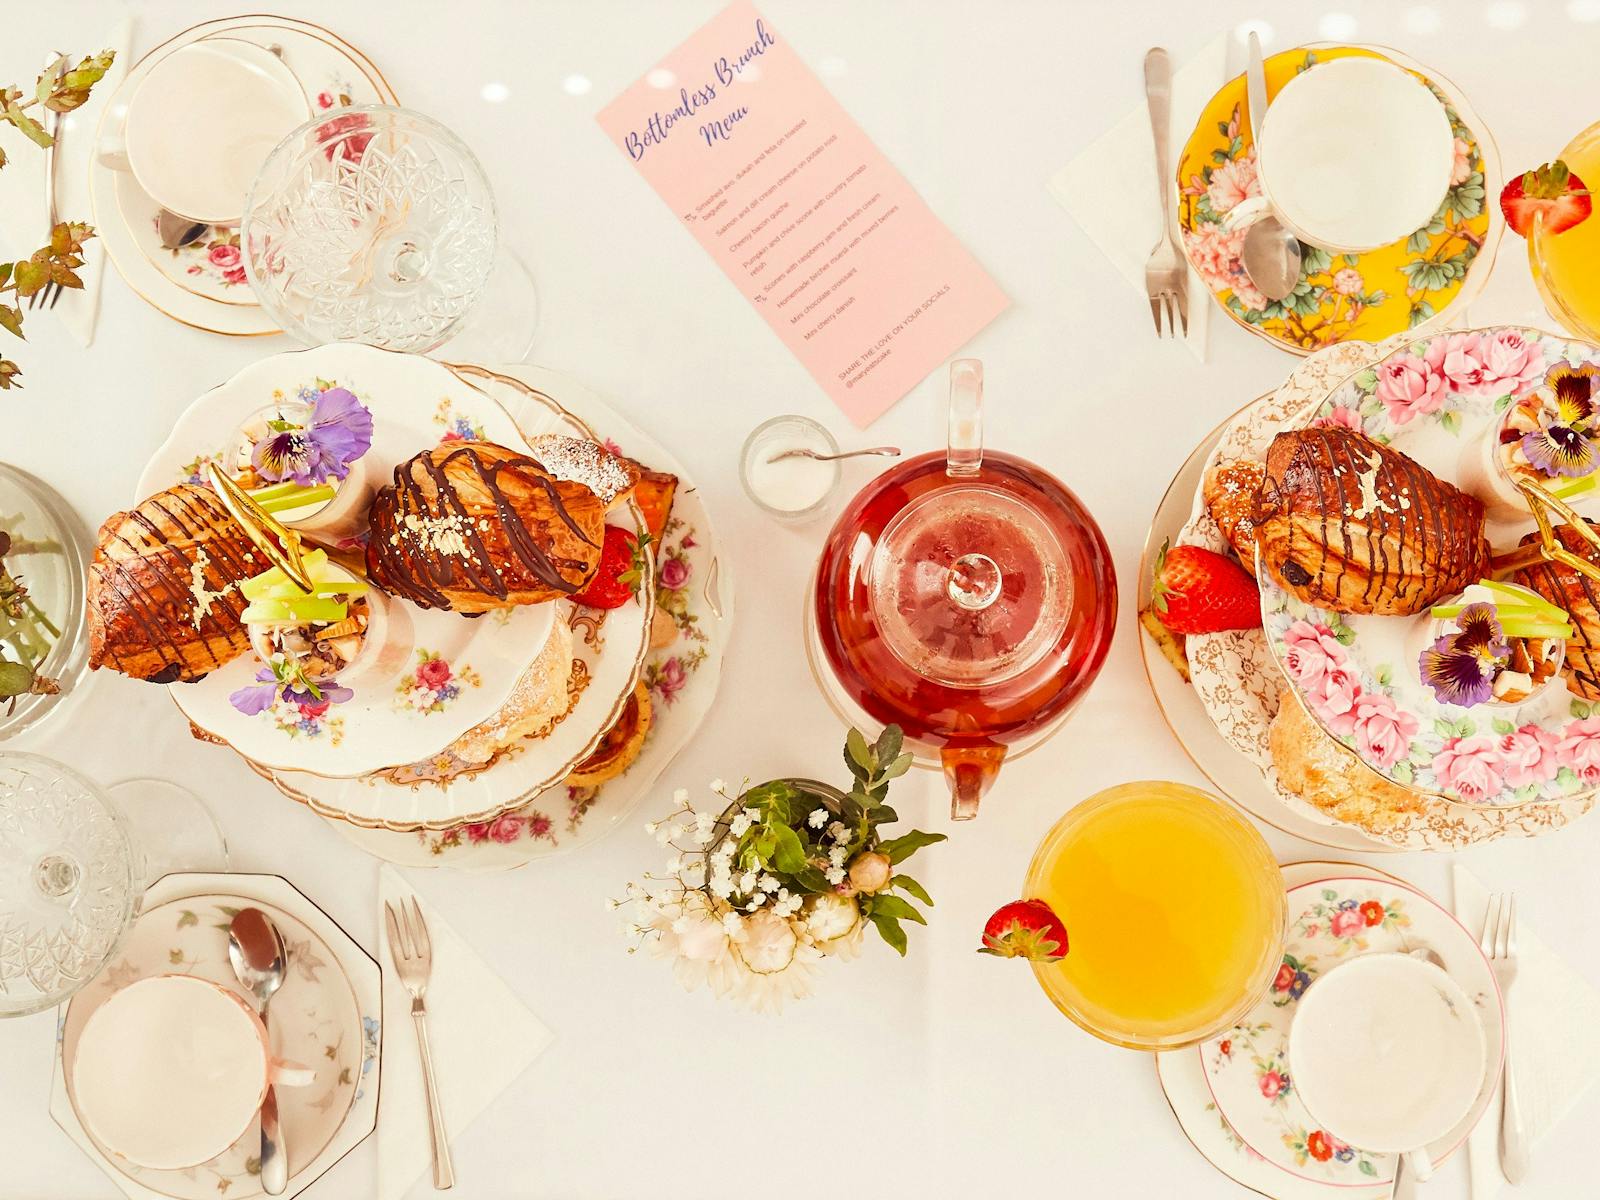 Image for Bottomless Brunch at Mary Eats Cake Brunswick